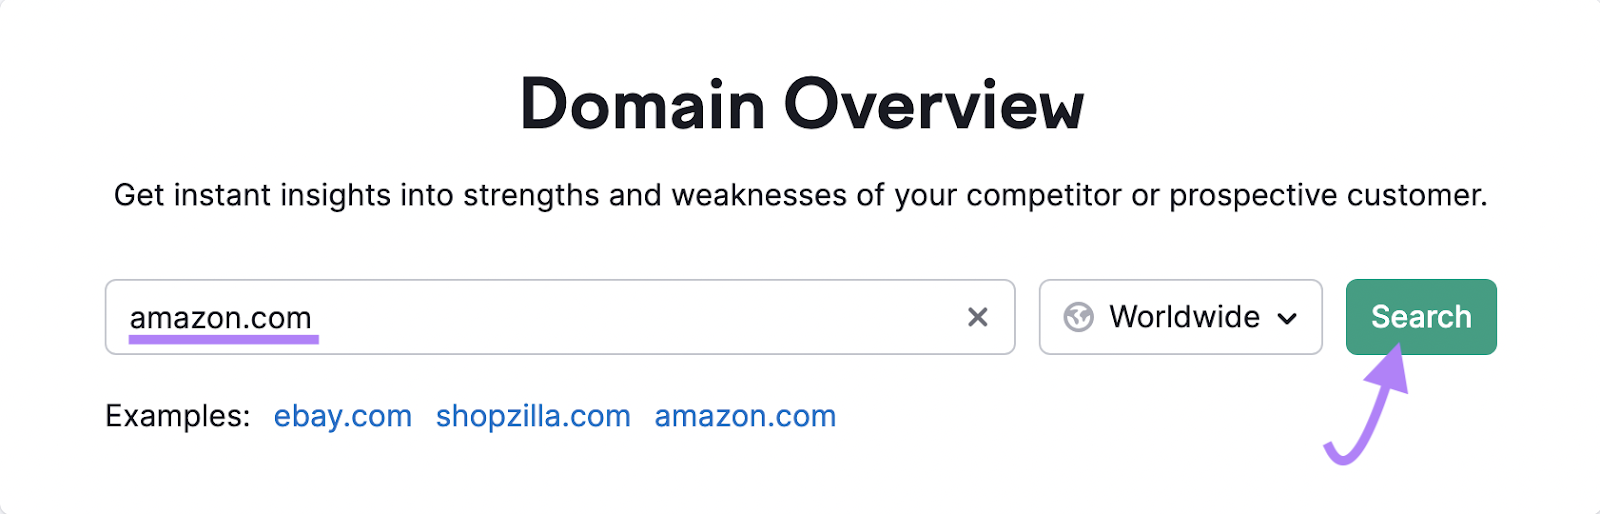 "amazon.com" entered into the Domain Overview search bar